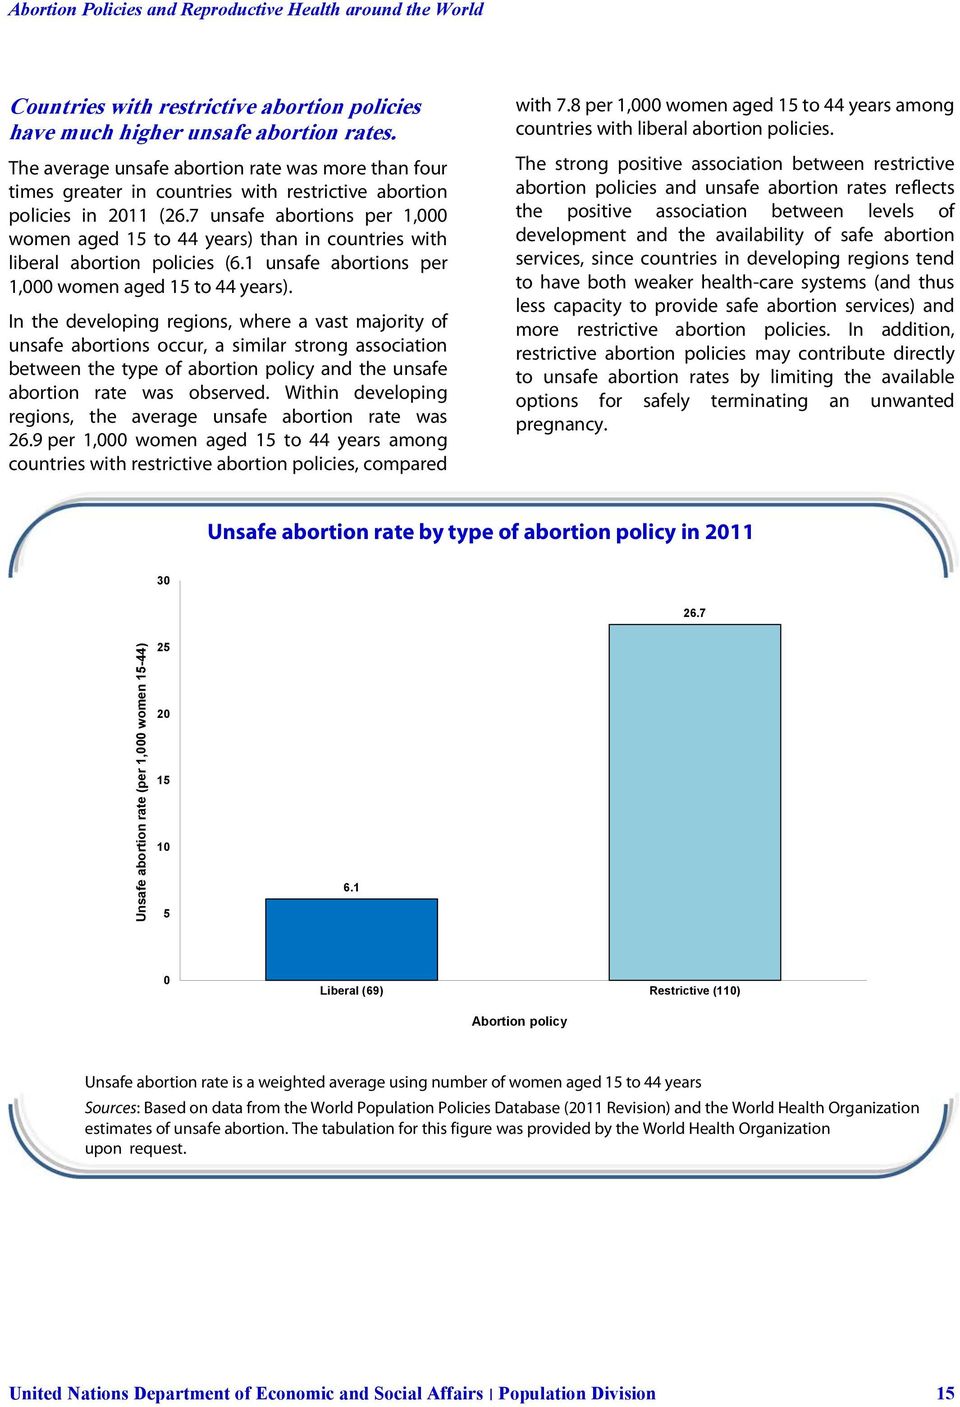 7 unsafe abortions per 1,000 women aged 15 to 44 years) than in countries with liberal abortion policies (6.1 unsafe abortions per 1,000 women aged 15 to 44 years).